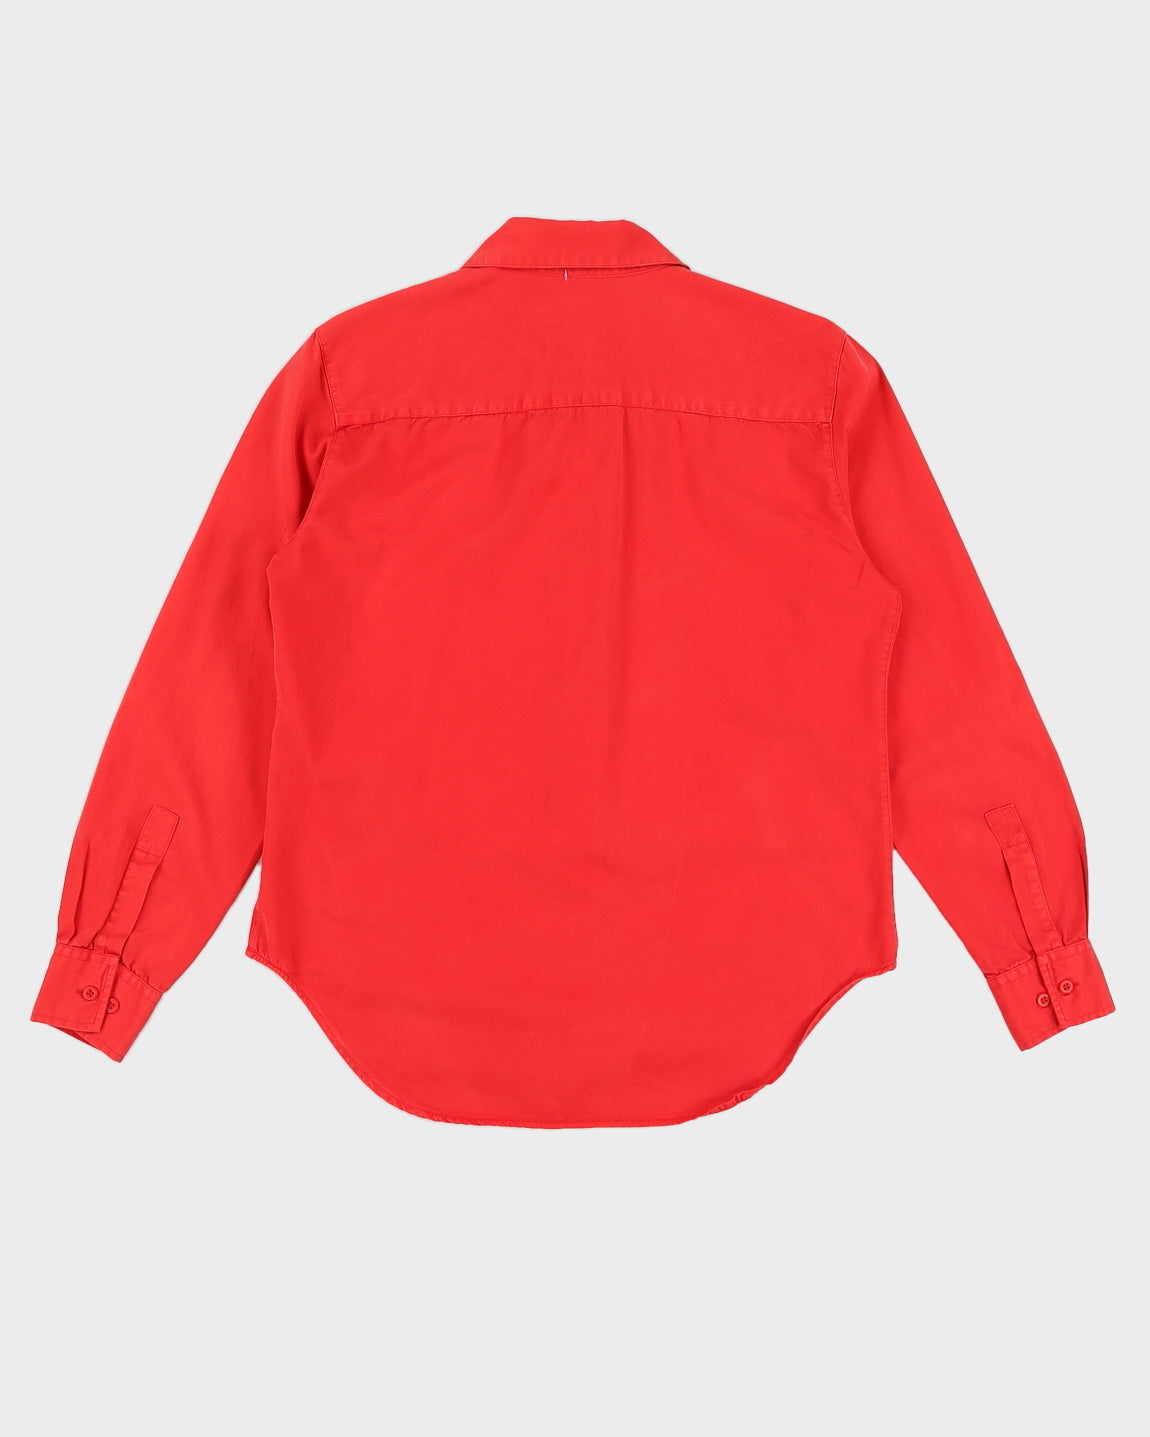 Vintage 90s Armani Jeans Red Long Sleeved Shirt - S